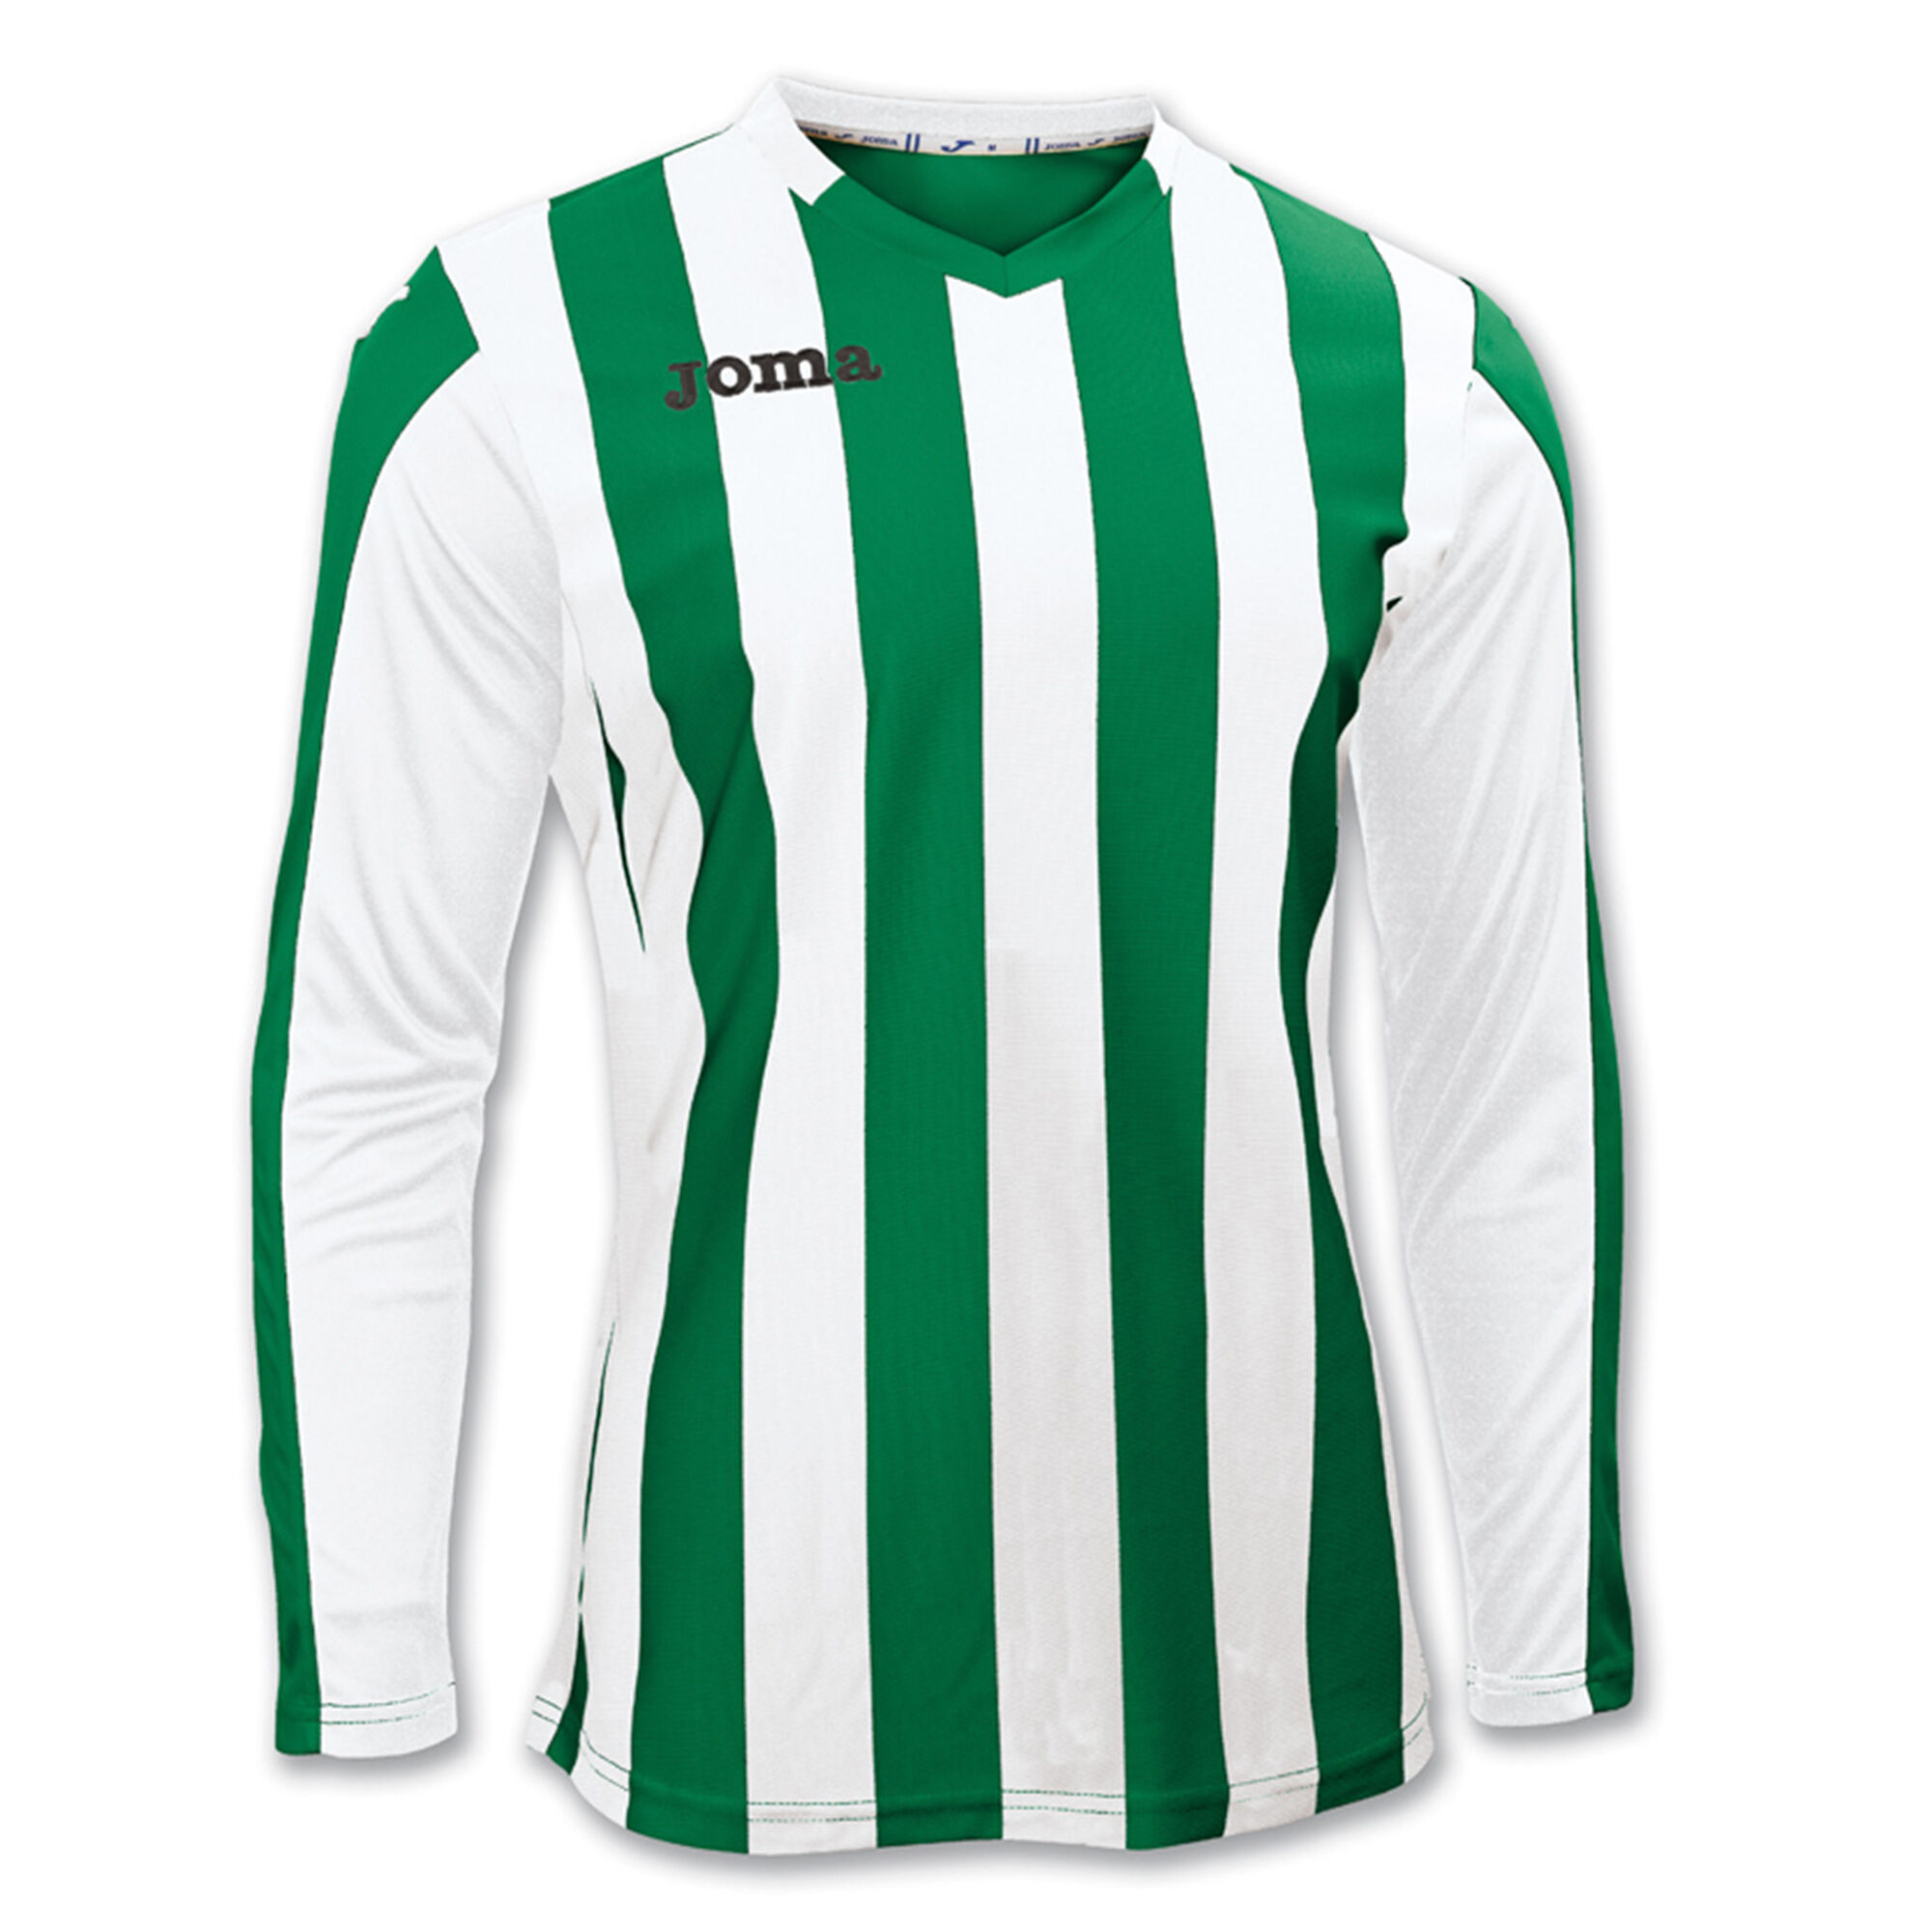 MAILLOT MANCHES LONGUES HOMME COPA VERT BLANC